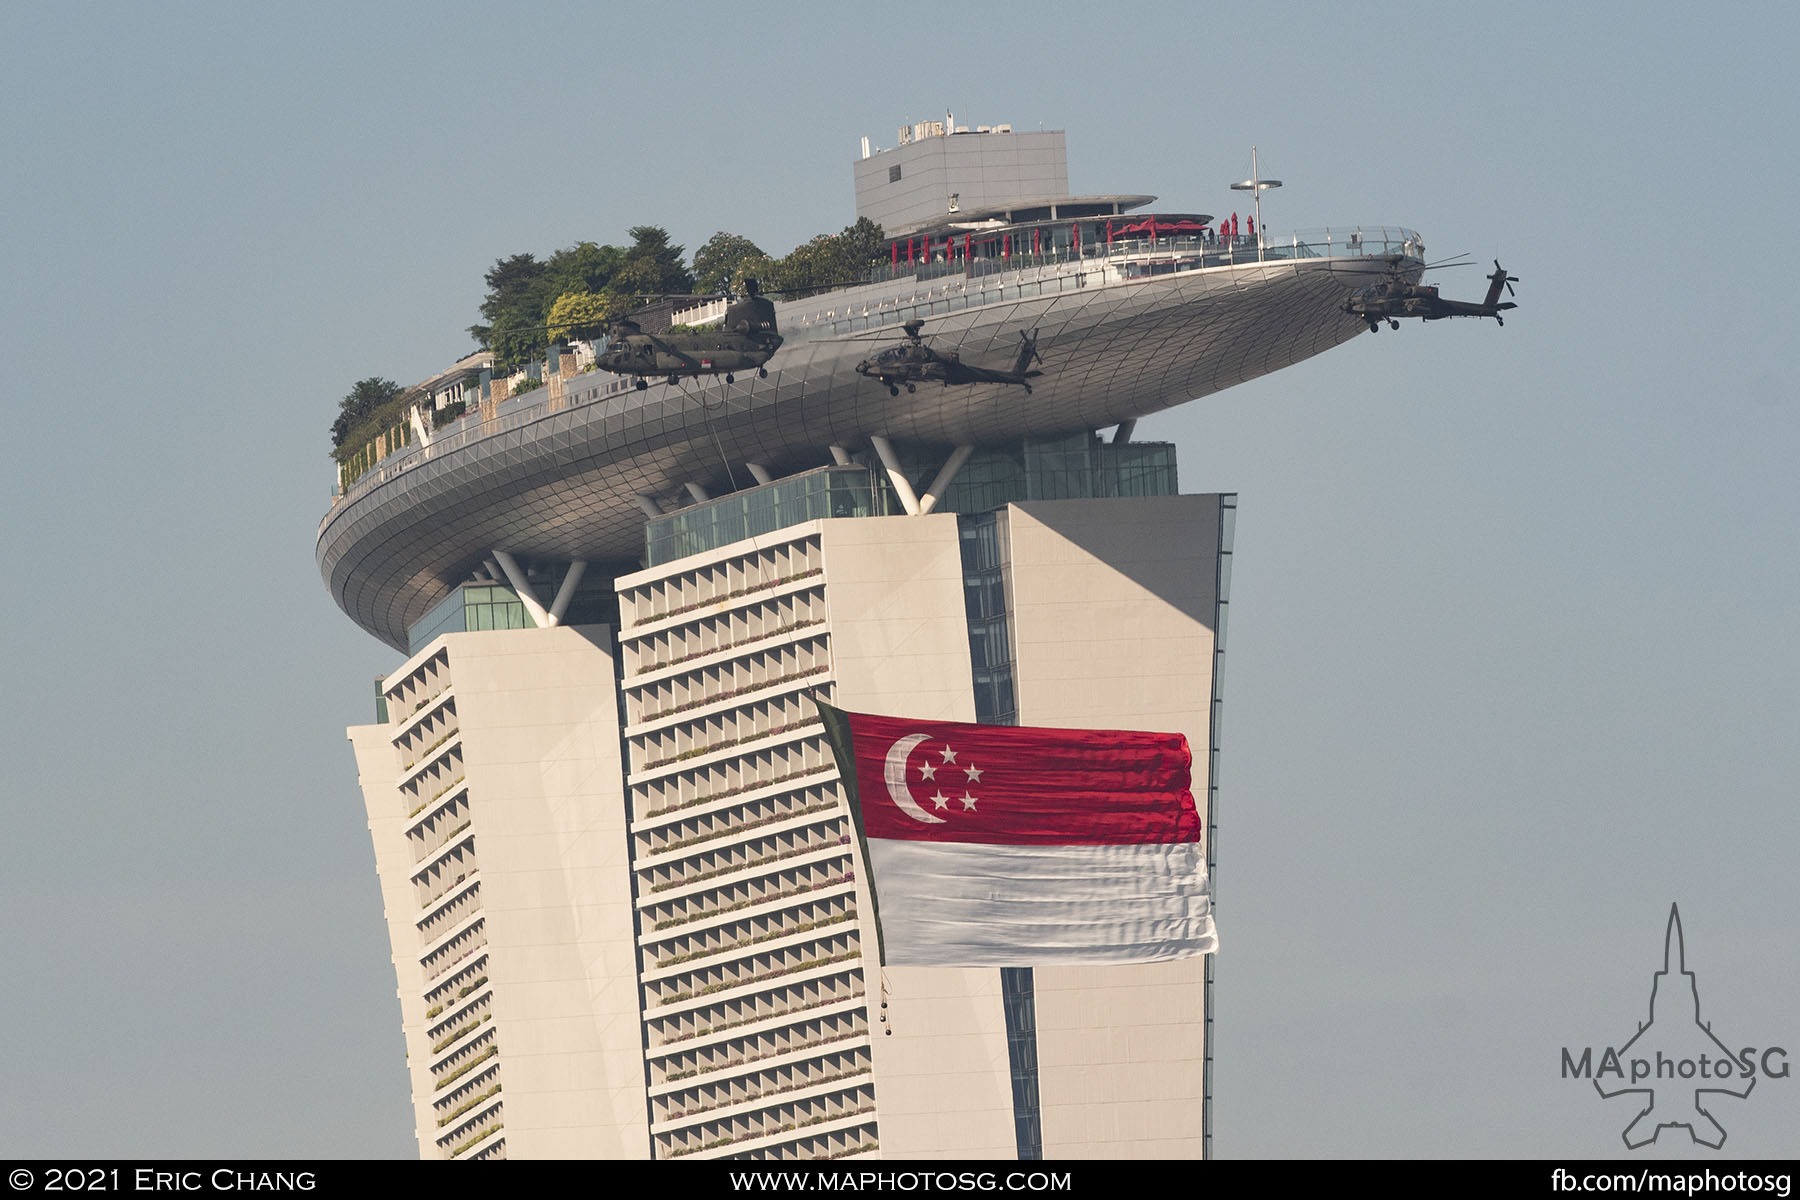 The flag party flies past the Marina Bay Sands hotel as it leaves the parade